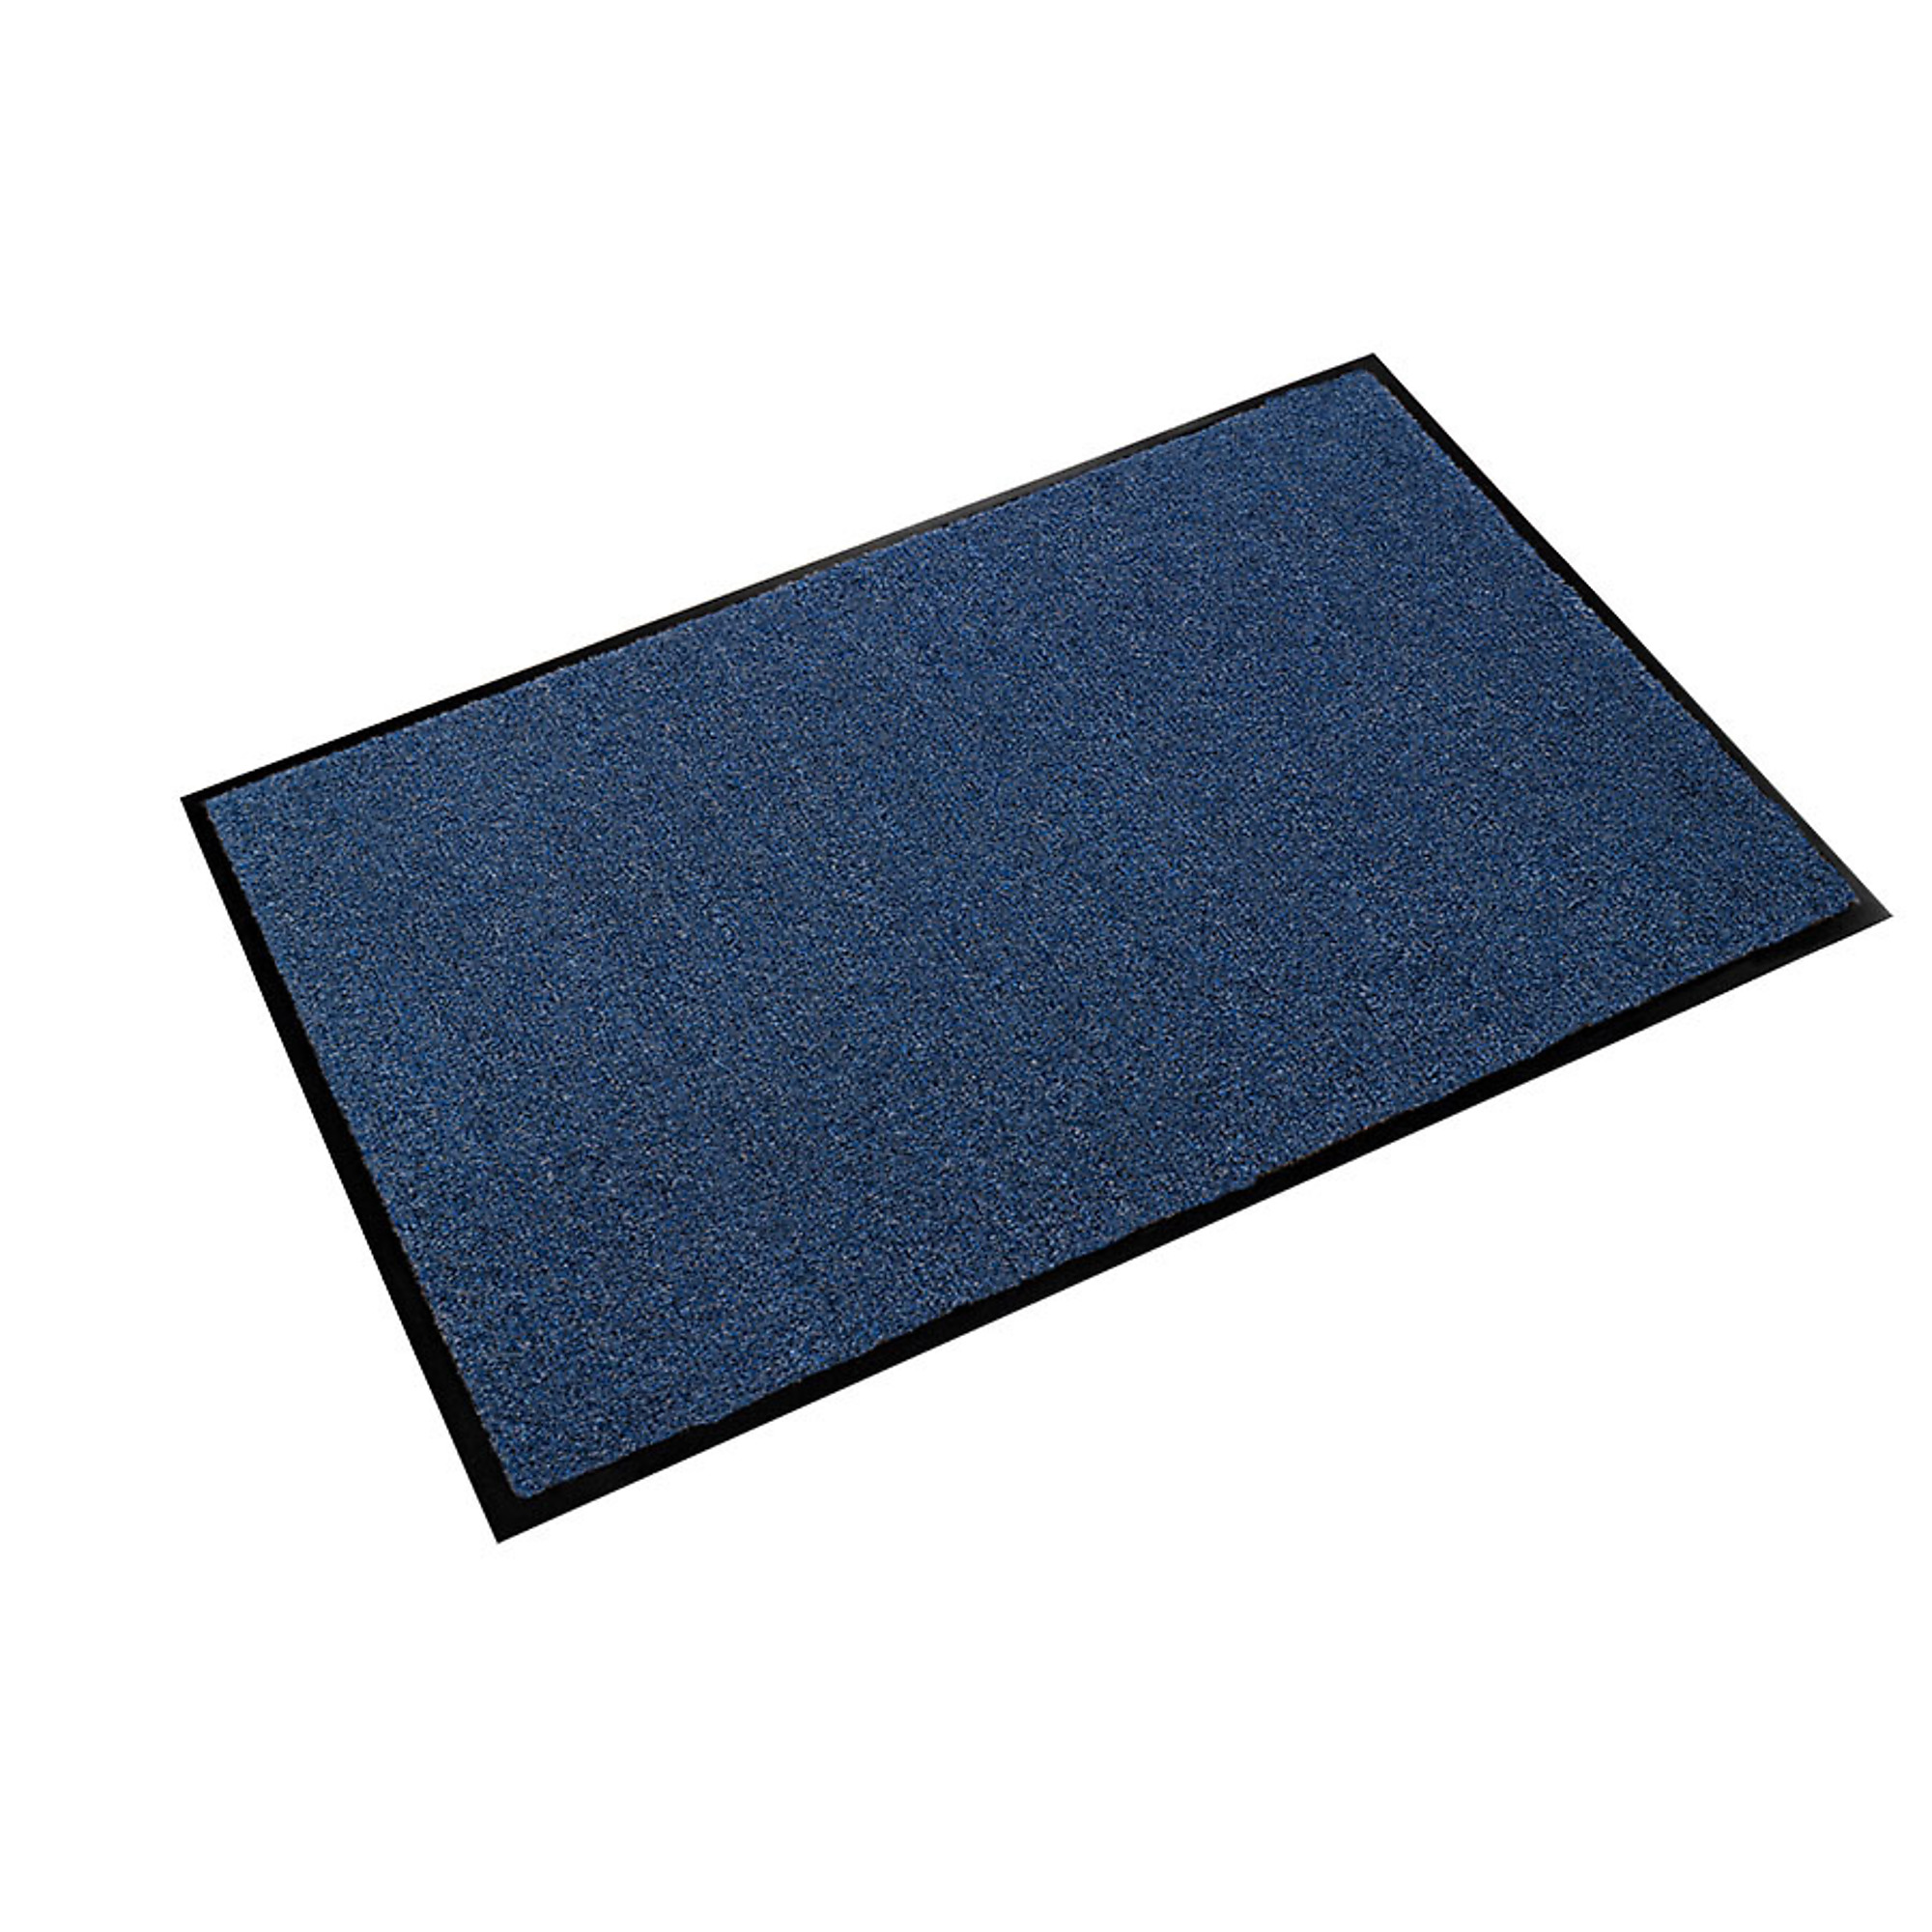 Crown Matting Technologies, Rely-On Olefin 4ft.x60ft. Marlin Blue, Width 48 in, Length 720 in, Thickness 3/8 in, Model GSR0048MB